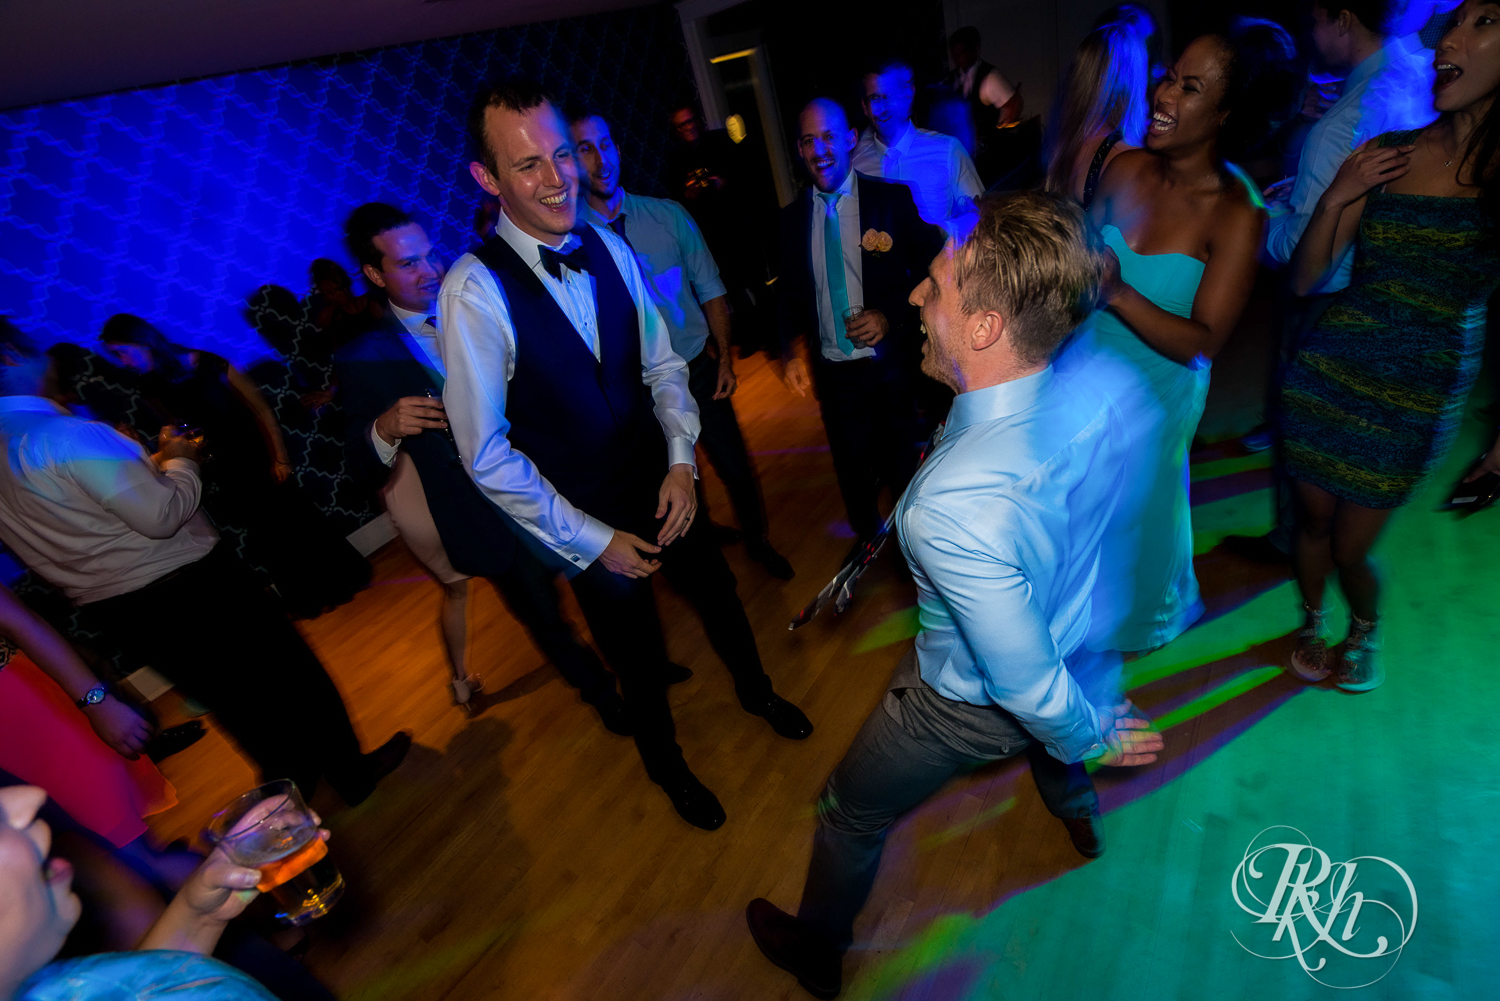 Bride and groom dance with guests during reception at White Bear Yacht Club in Dellwood, Minnesota.